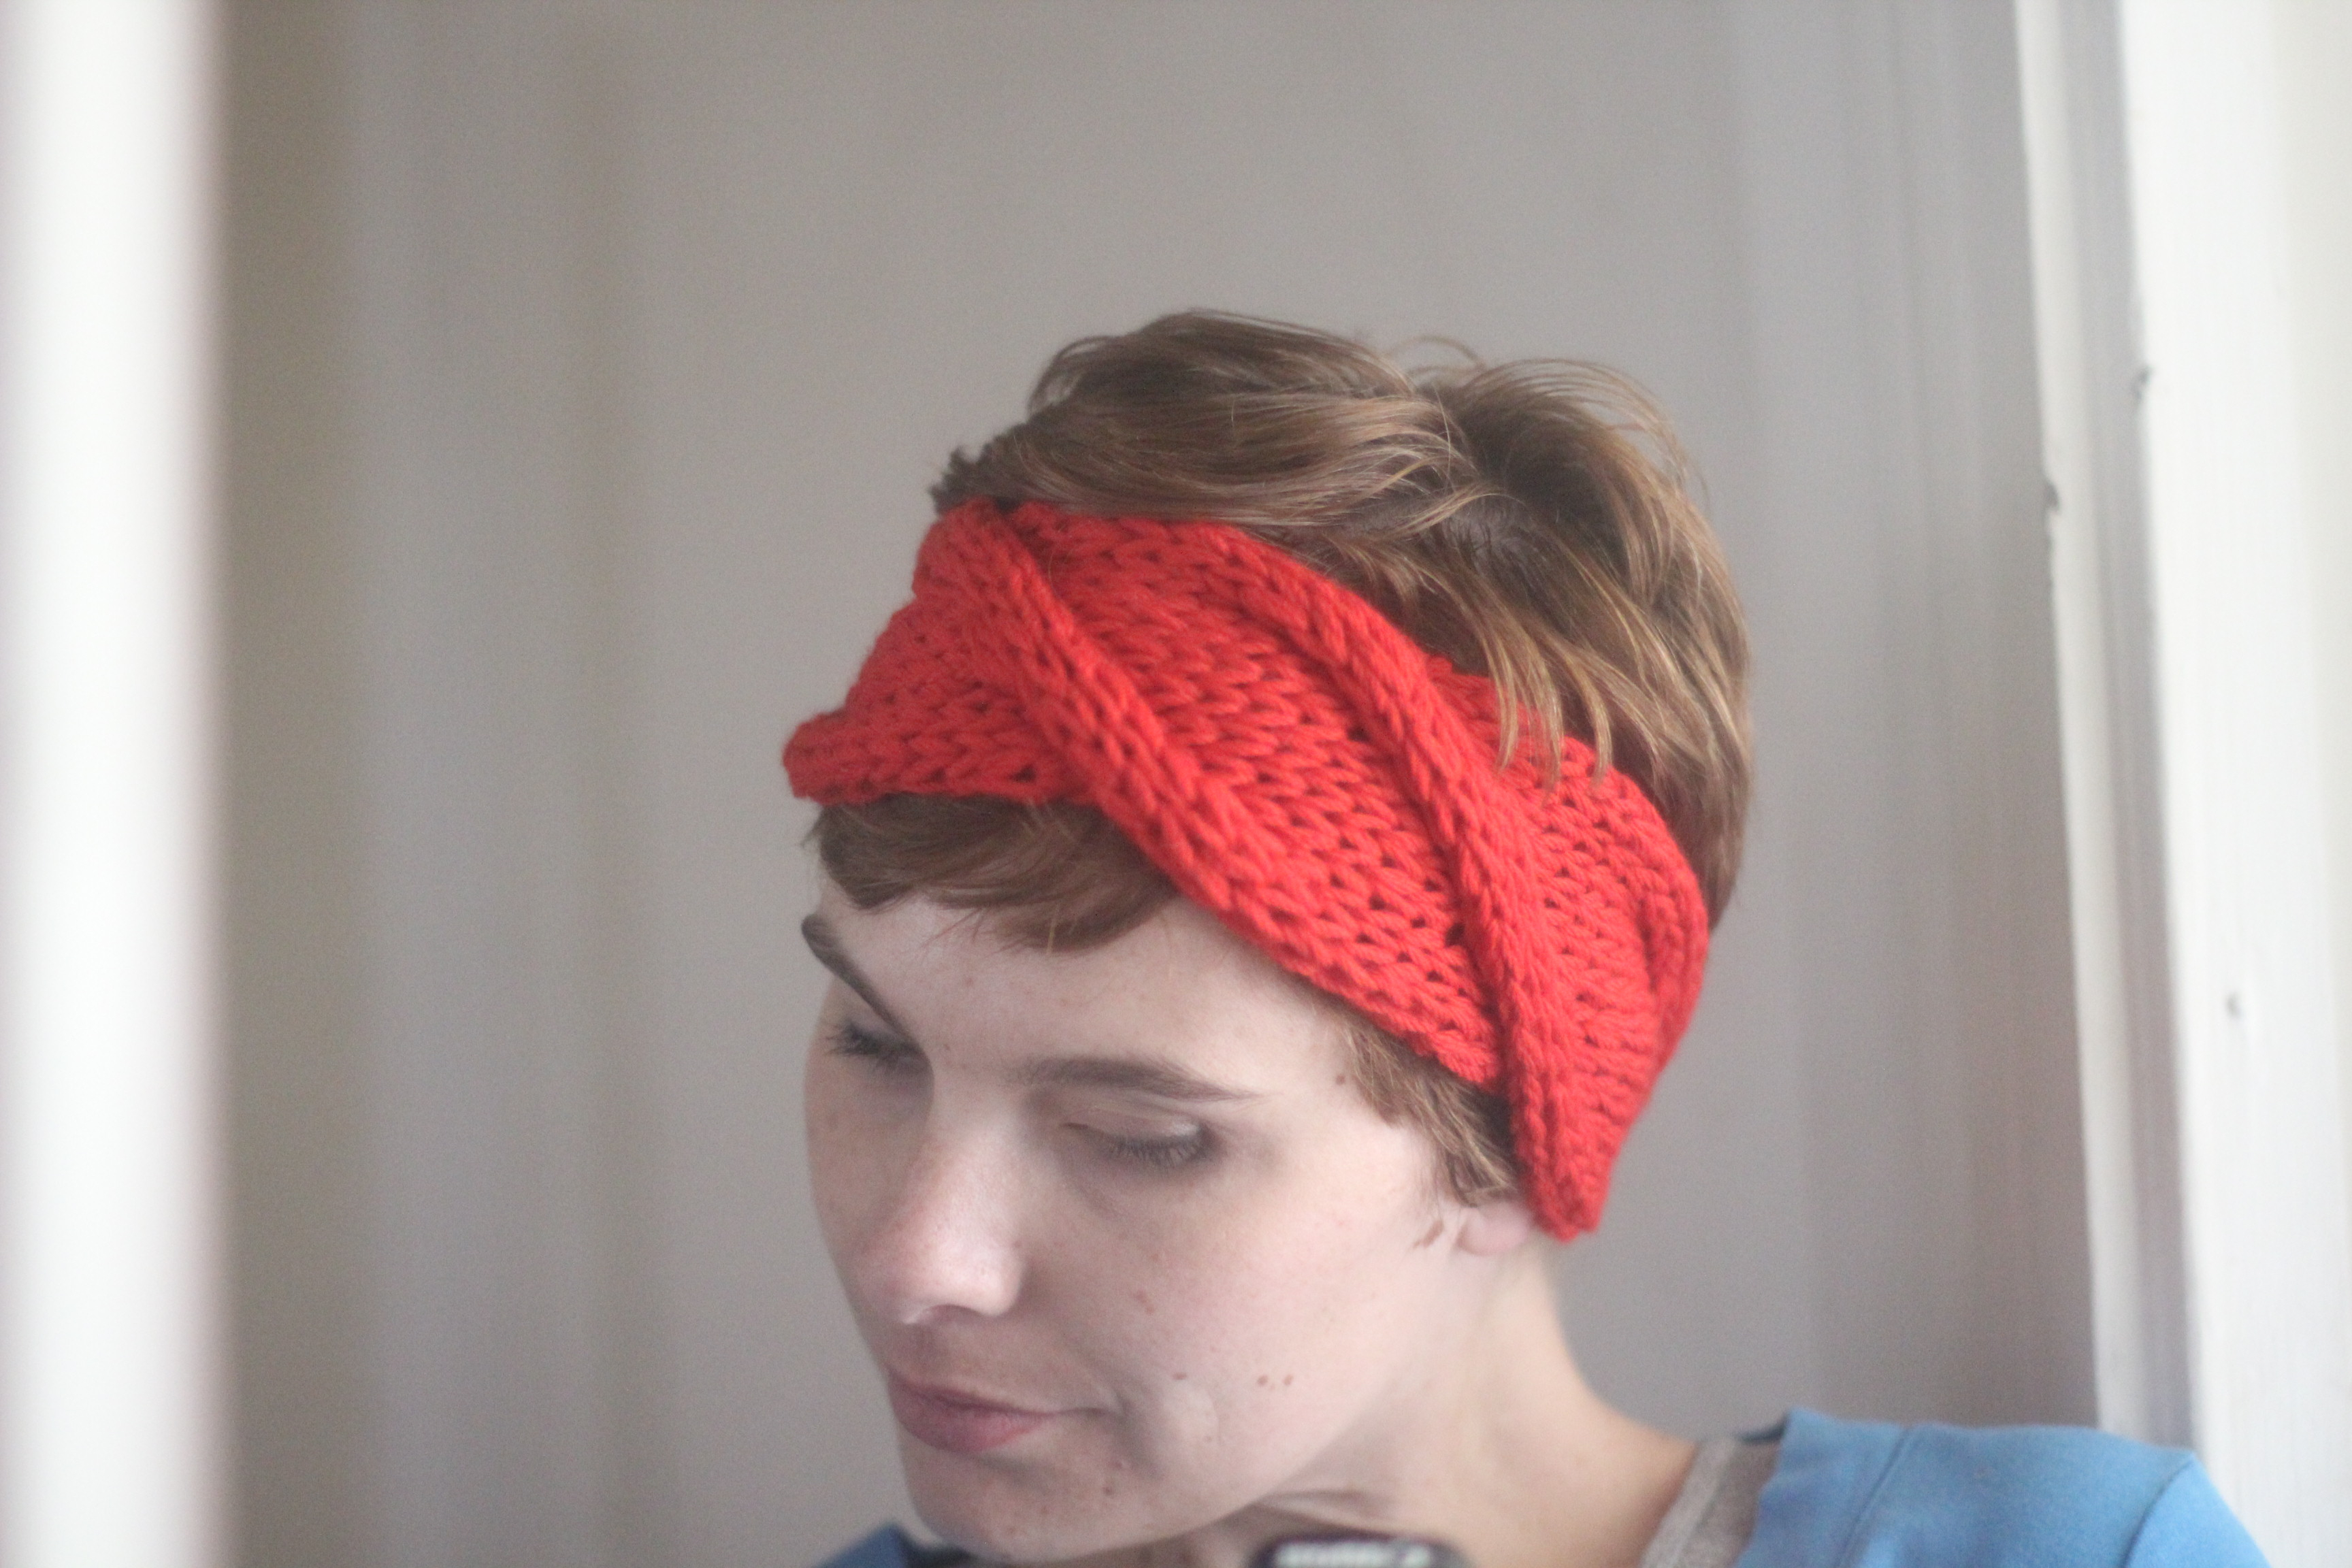 Easy Cable Knit Headband Pattern Cable Headband Knitting Pattern Easy The Sweatshop Of Love Blog